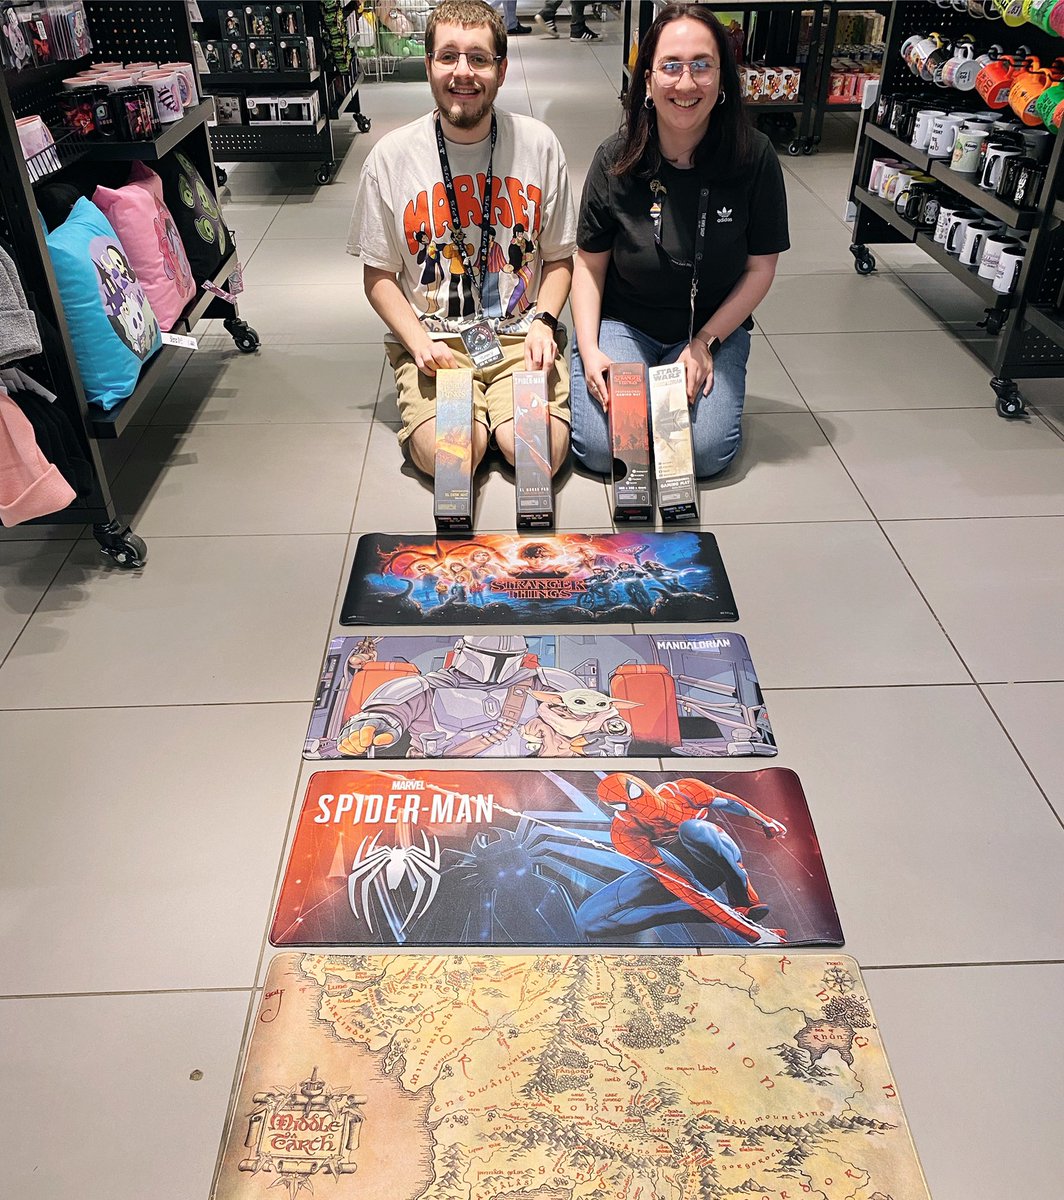 Jazz up your gaming set up with these awesome gaming mats from various franchises. We love them! @GrupoErikSL #hmvForTheFans